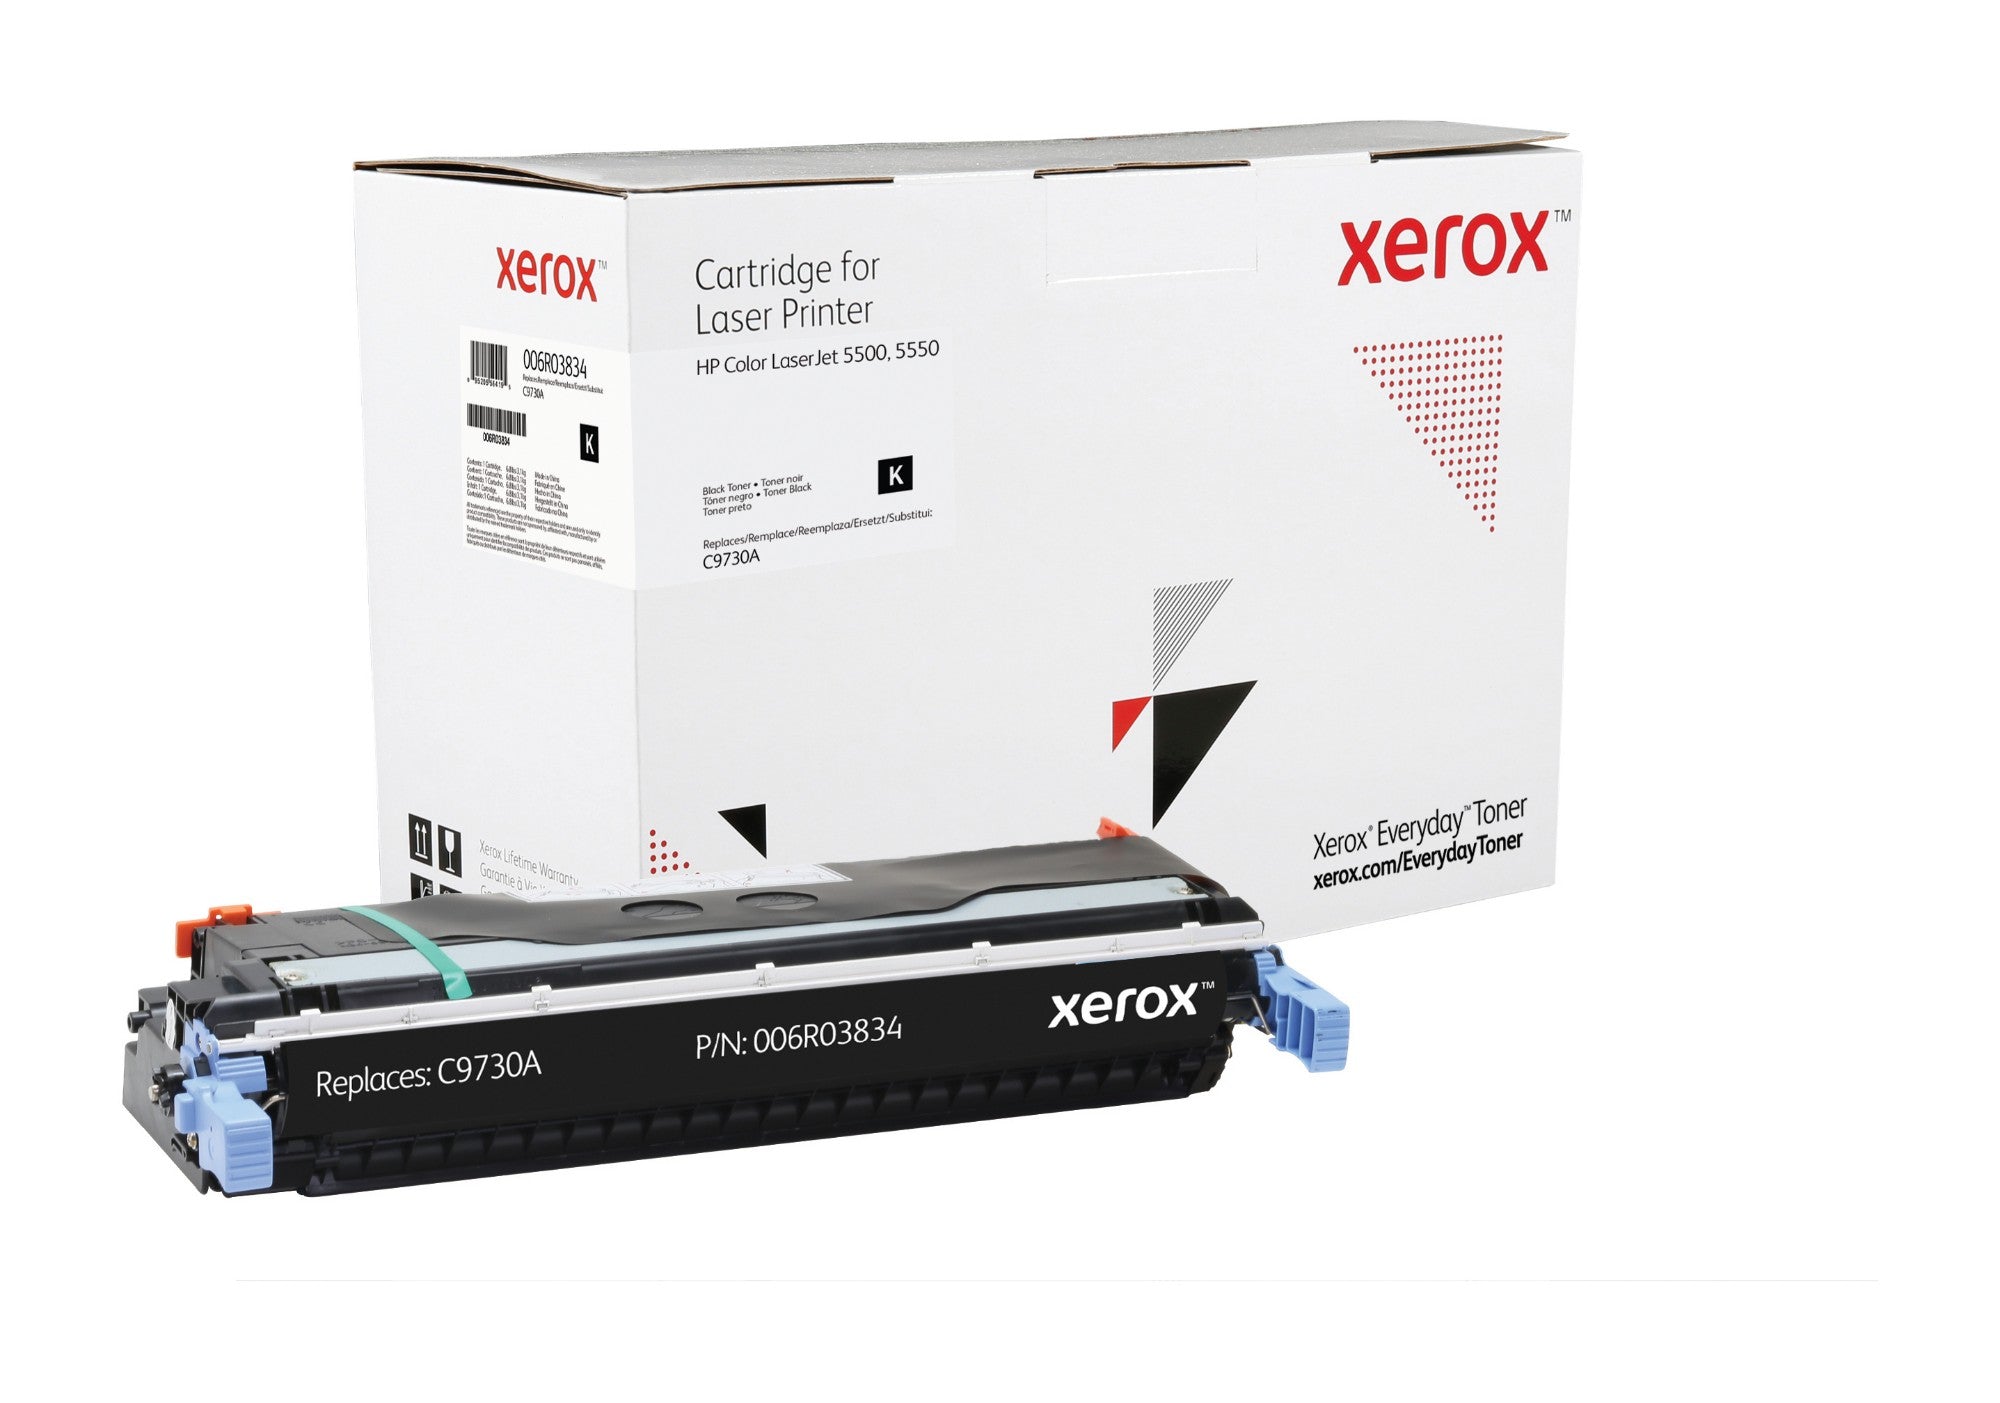 Xerox 006R03834 Toner cartridge black, 13K pages/5% (replaces HP 645A/C9730A) for Canon LBP-86